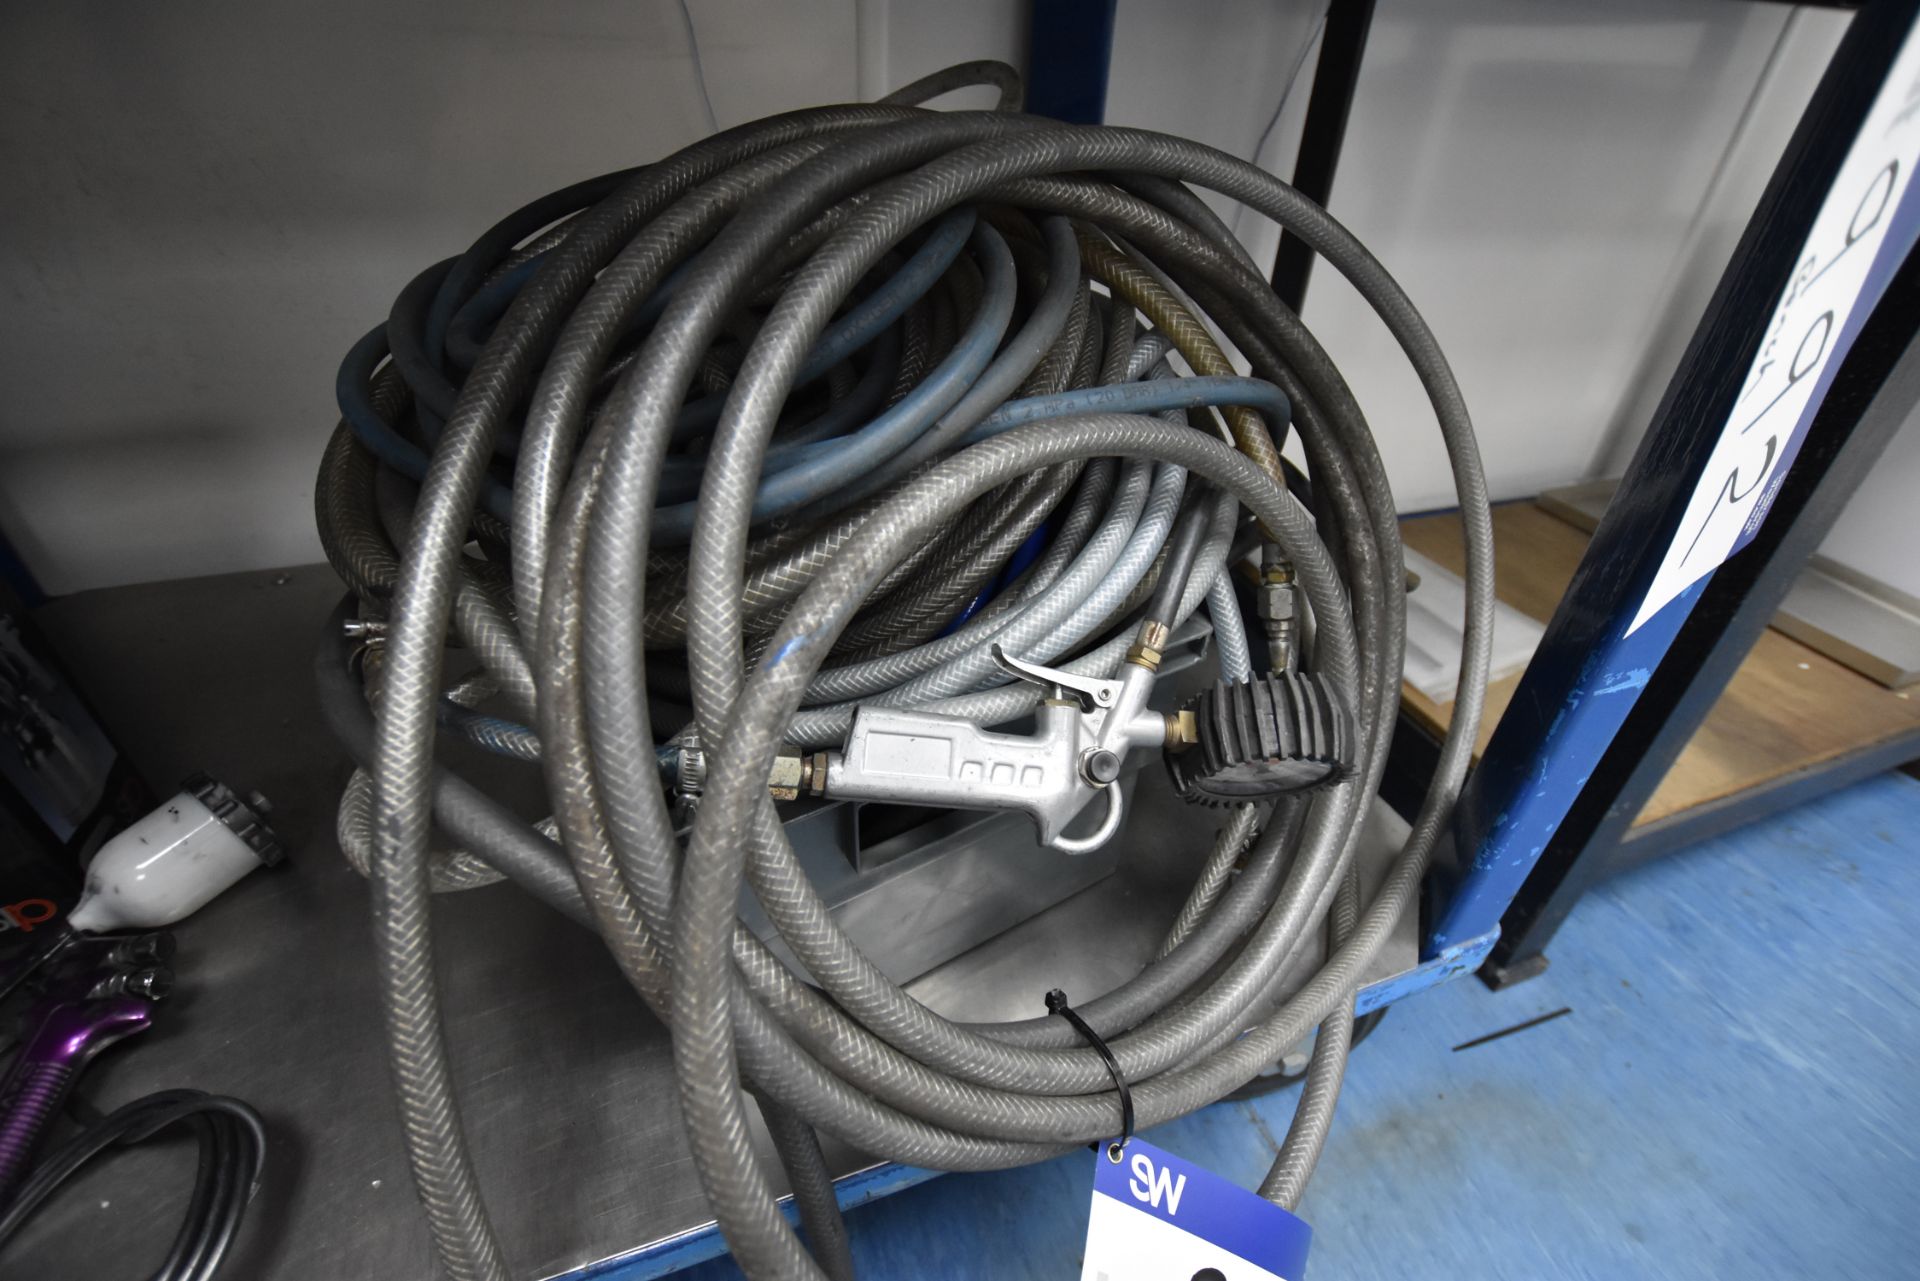 Compressed Air Hoses & Equipment, as set out